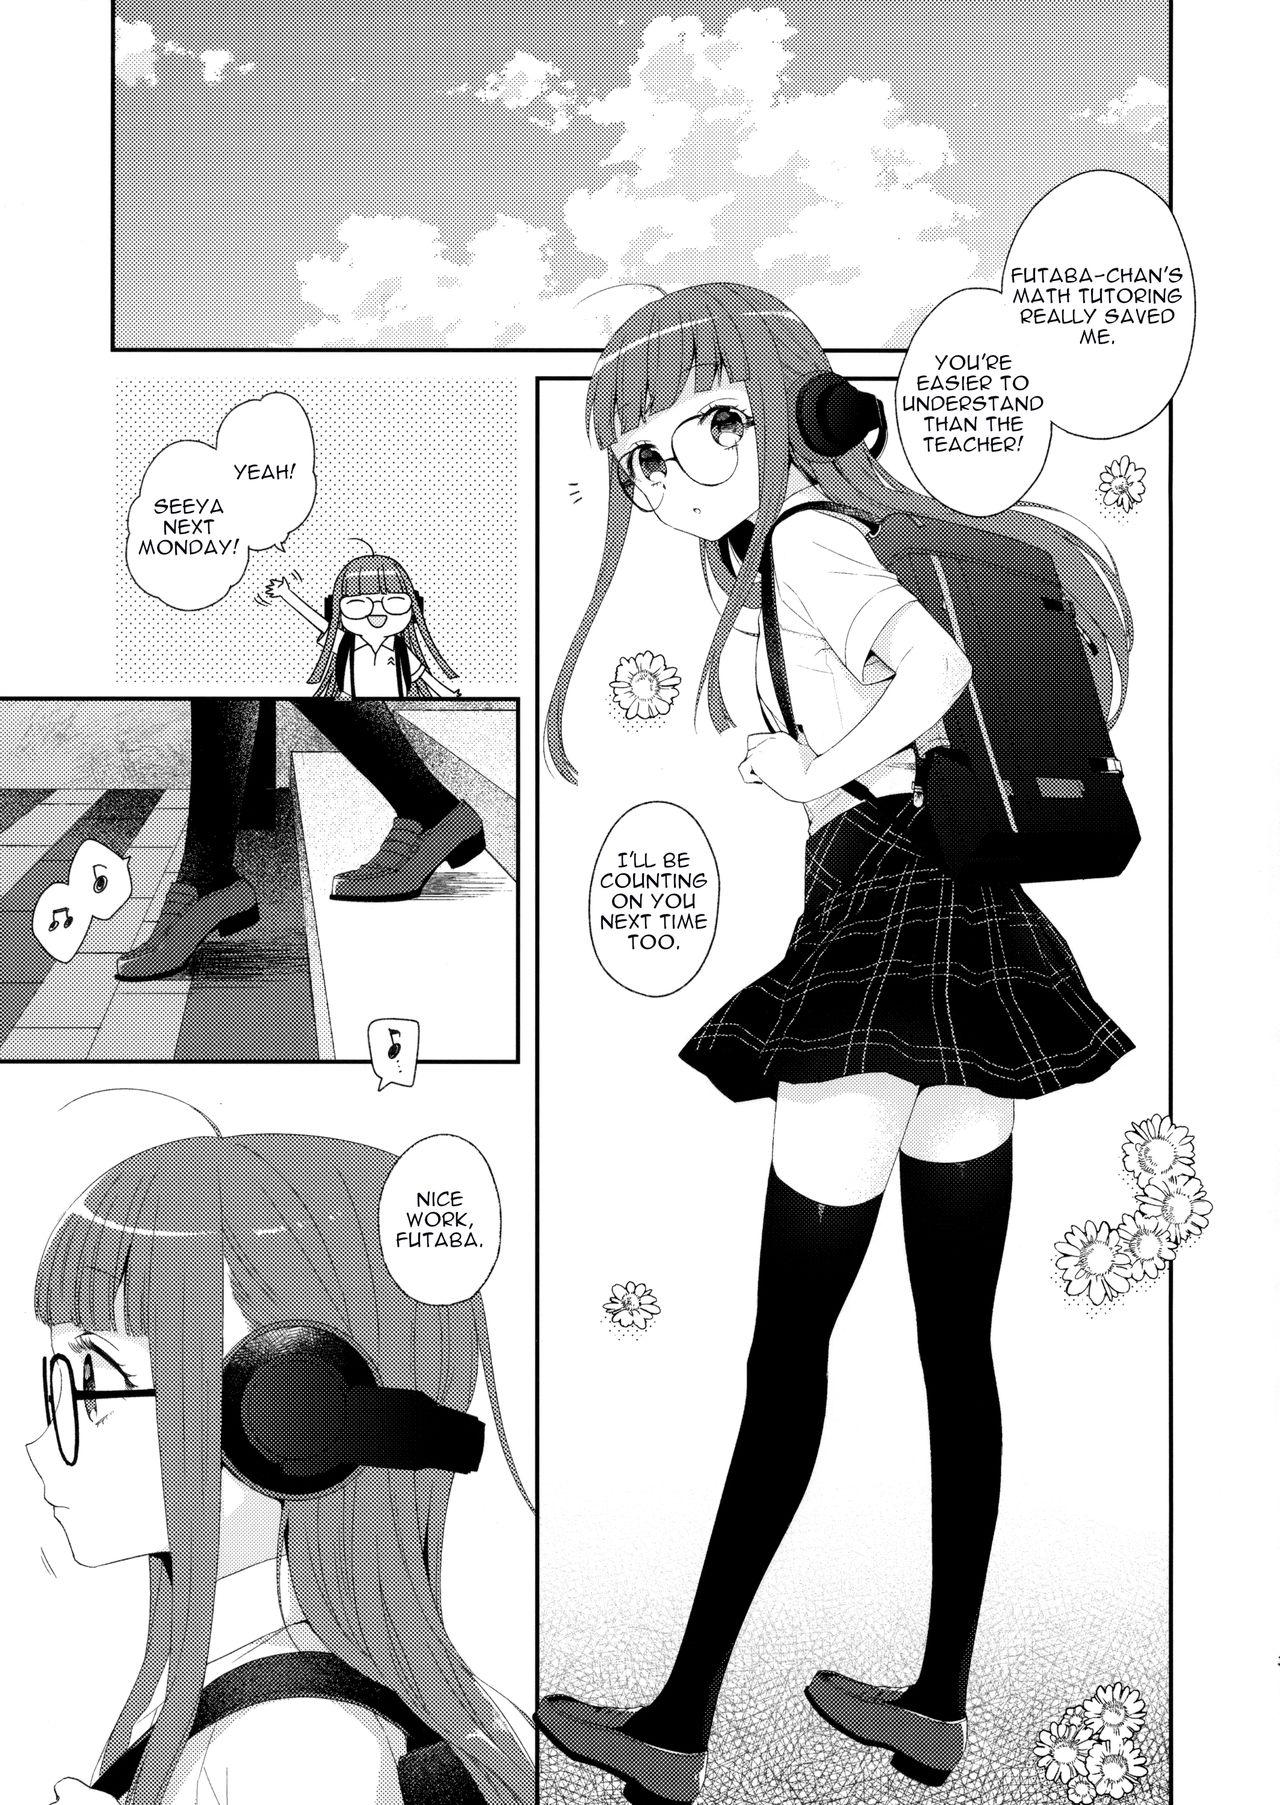 Caught Yaneura@Afterschool - Persona 5 Coed - Page 2